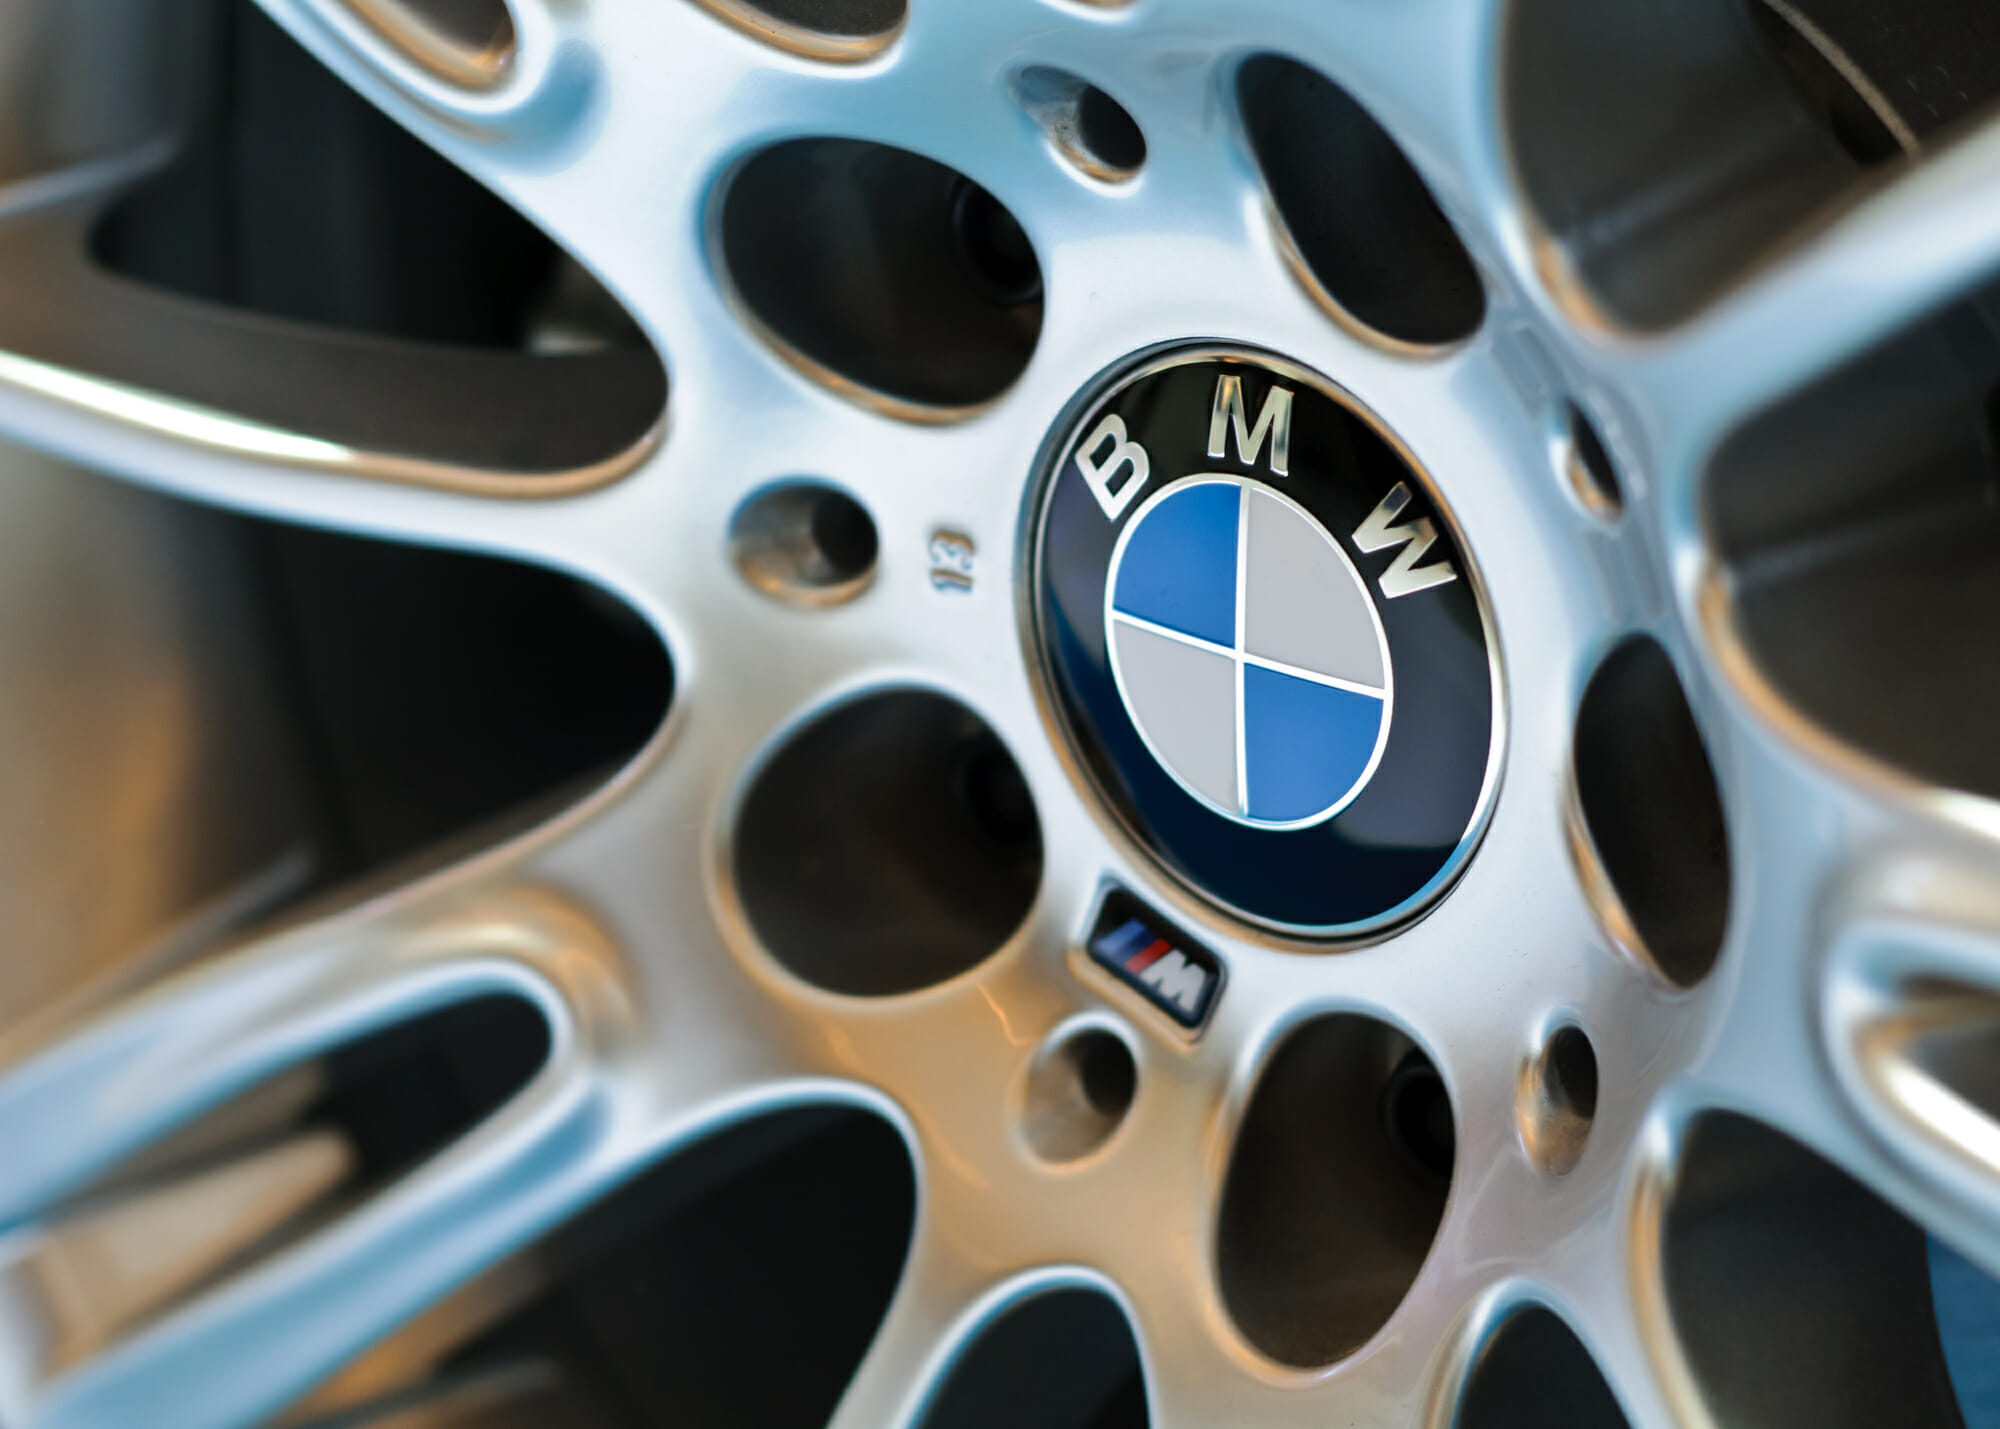 BMW 328i Tires: The Best Options